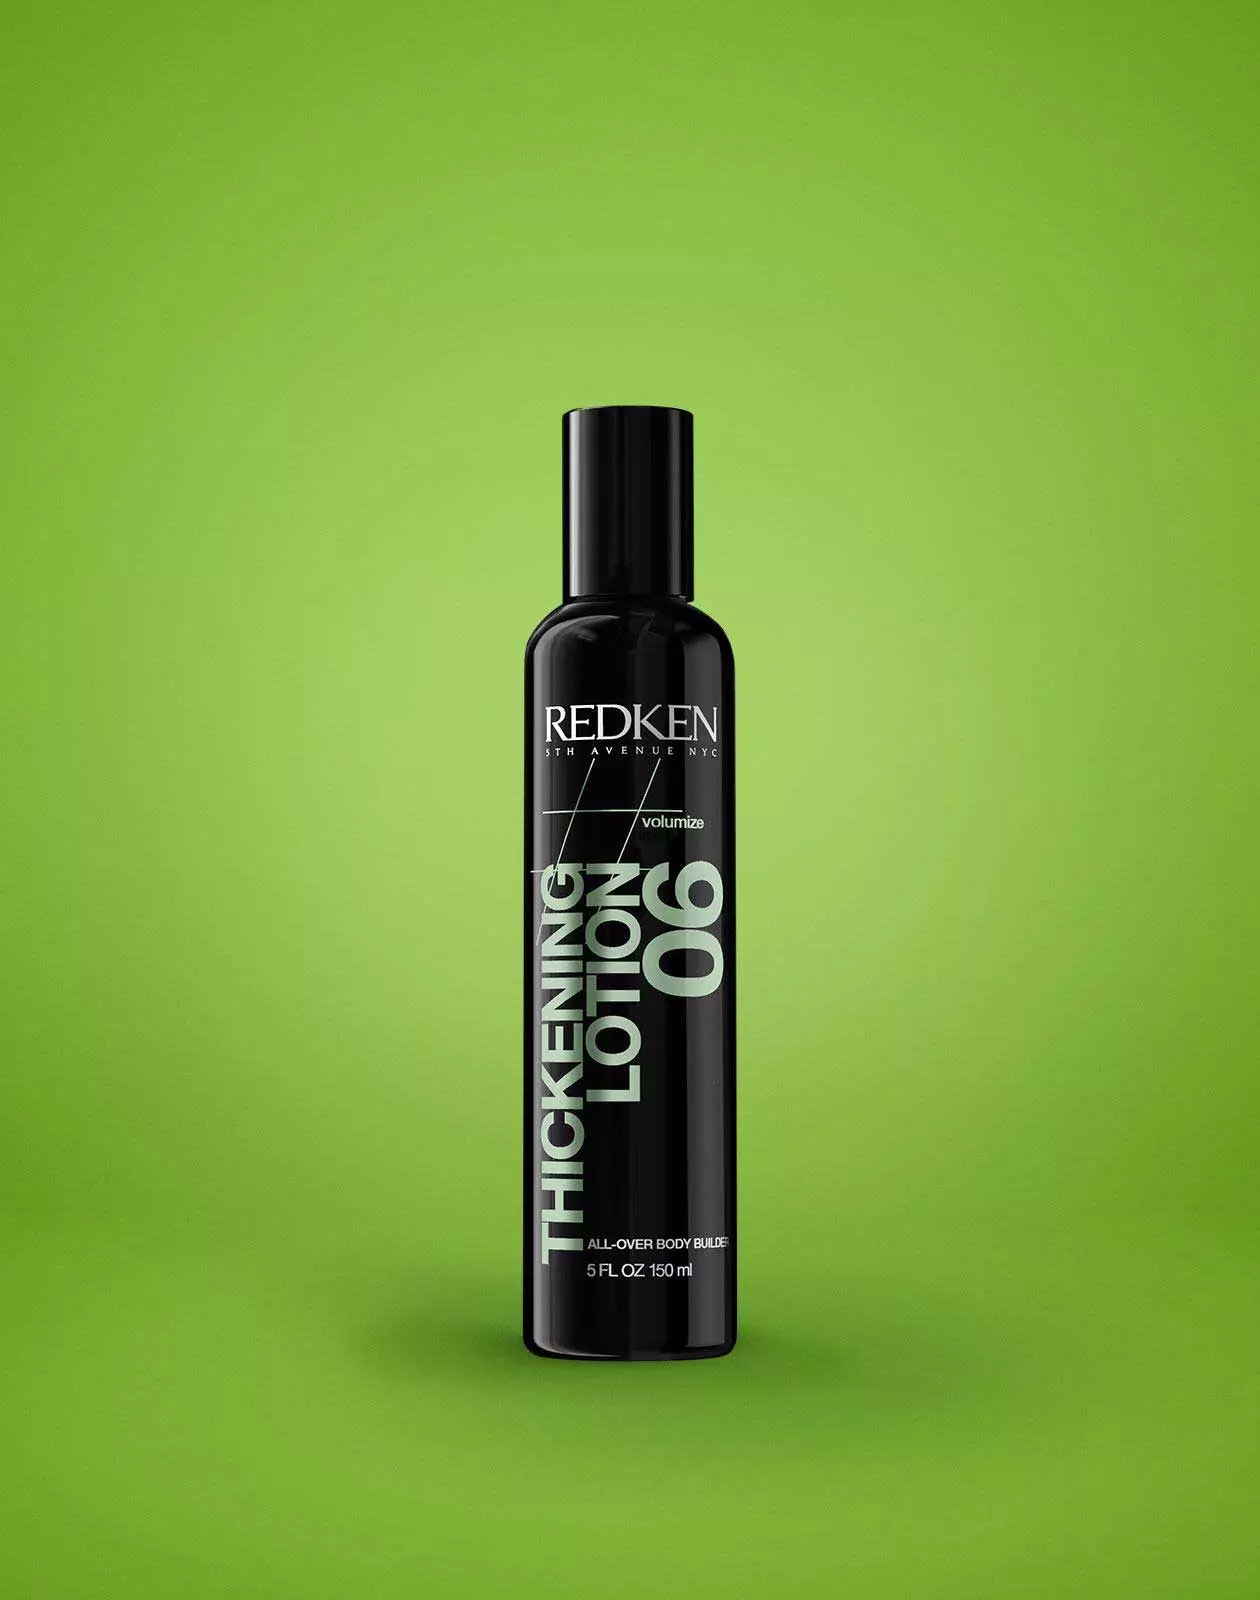 Redken Thickening Lotion 06 | For Fine Hair | Adds Weightless Body & Texture | Alcohol-Free 5 Fl Oz (Pack of 1)